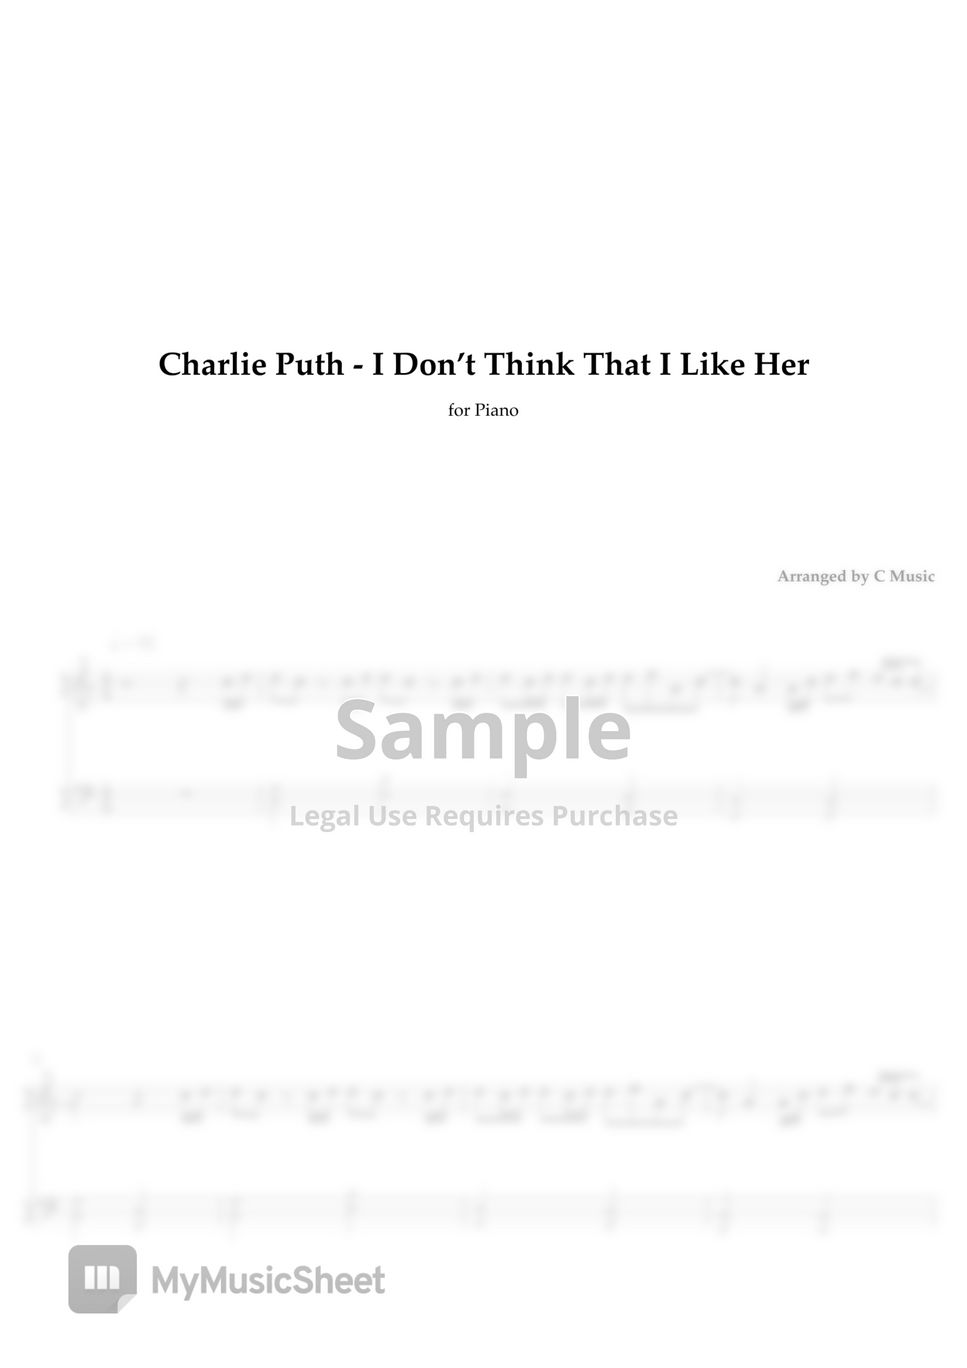 Charlie Puth - I don't think that I like her (Easy Version) by C Music